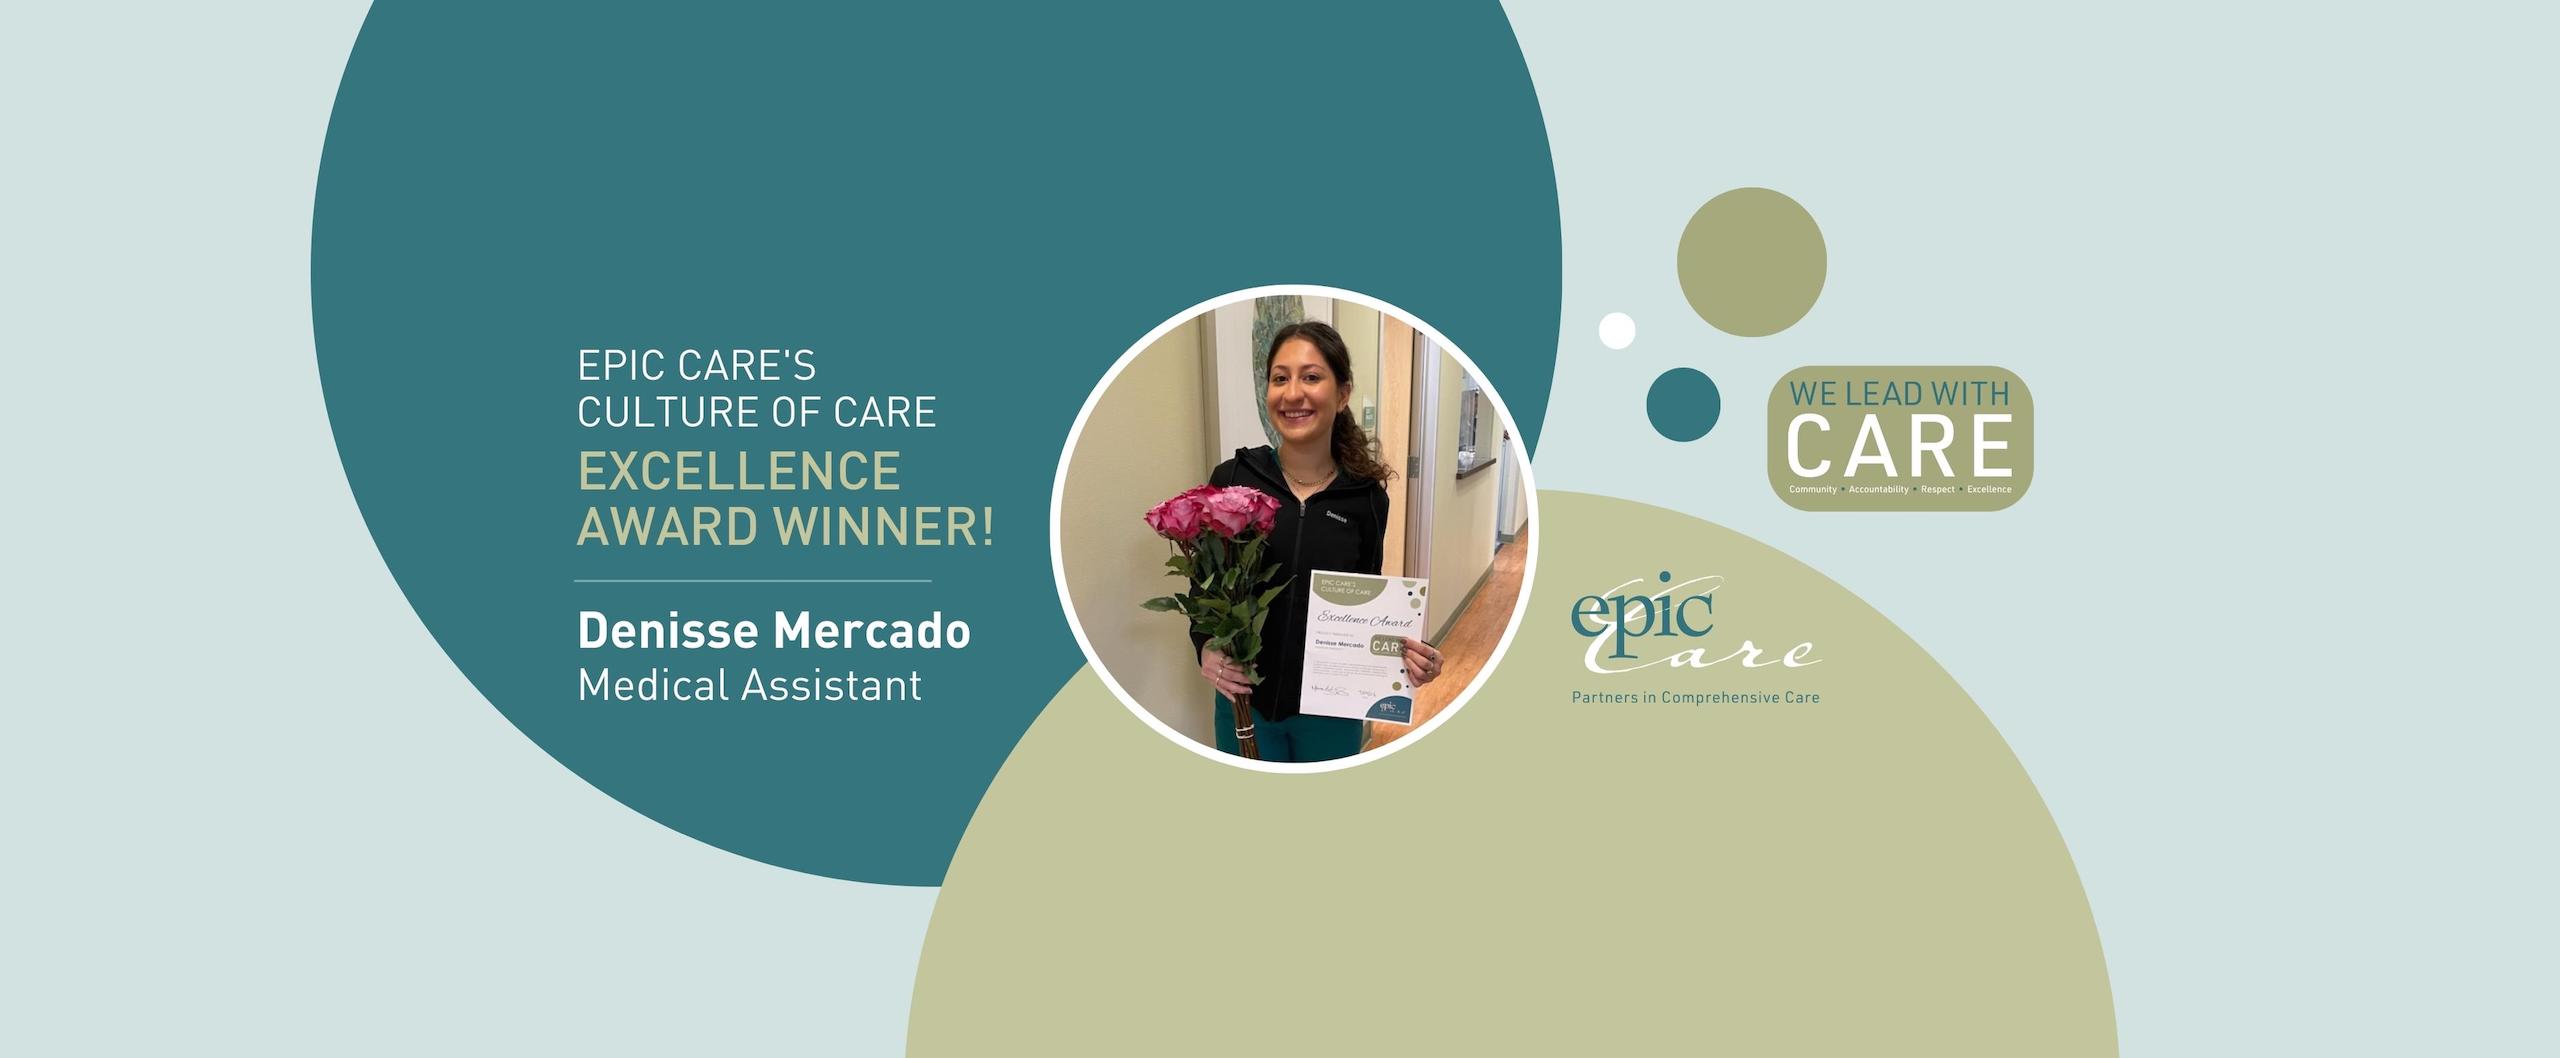 Epic Care’s Culture of CARE Excellence Award Winner! – Denisse Mercado